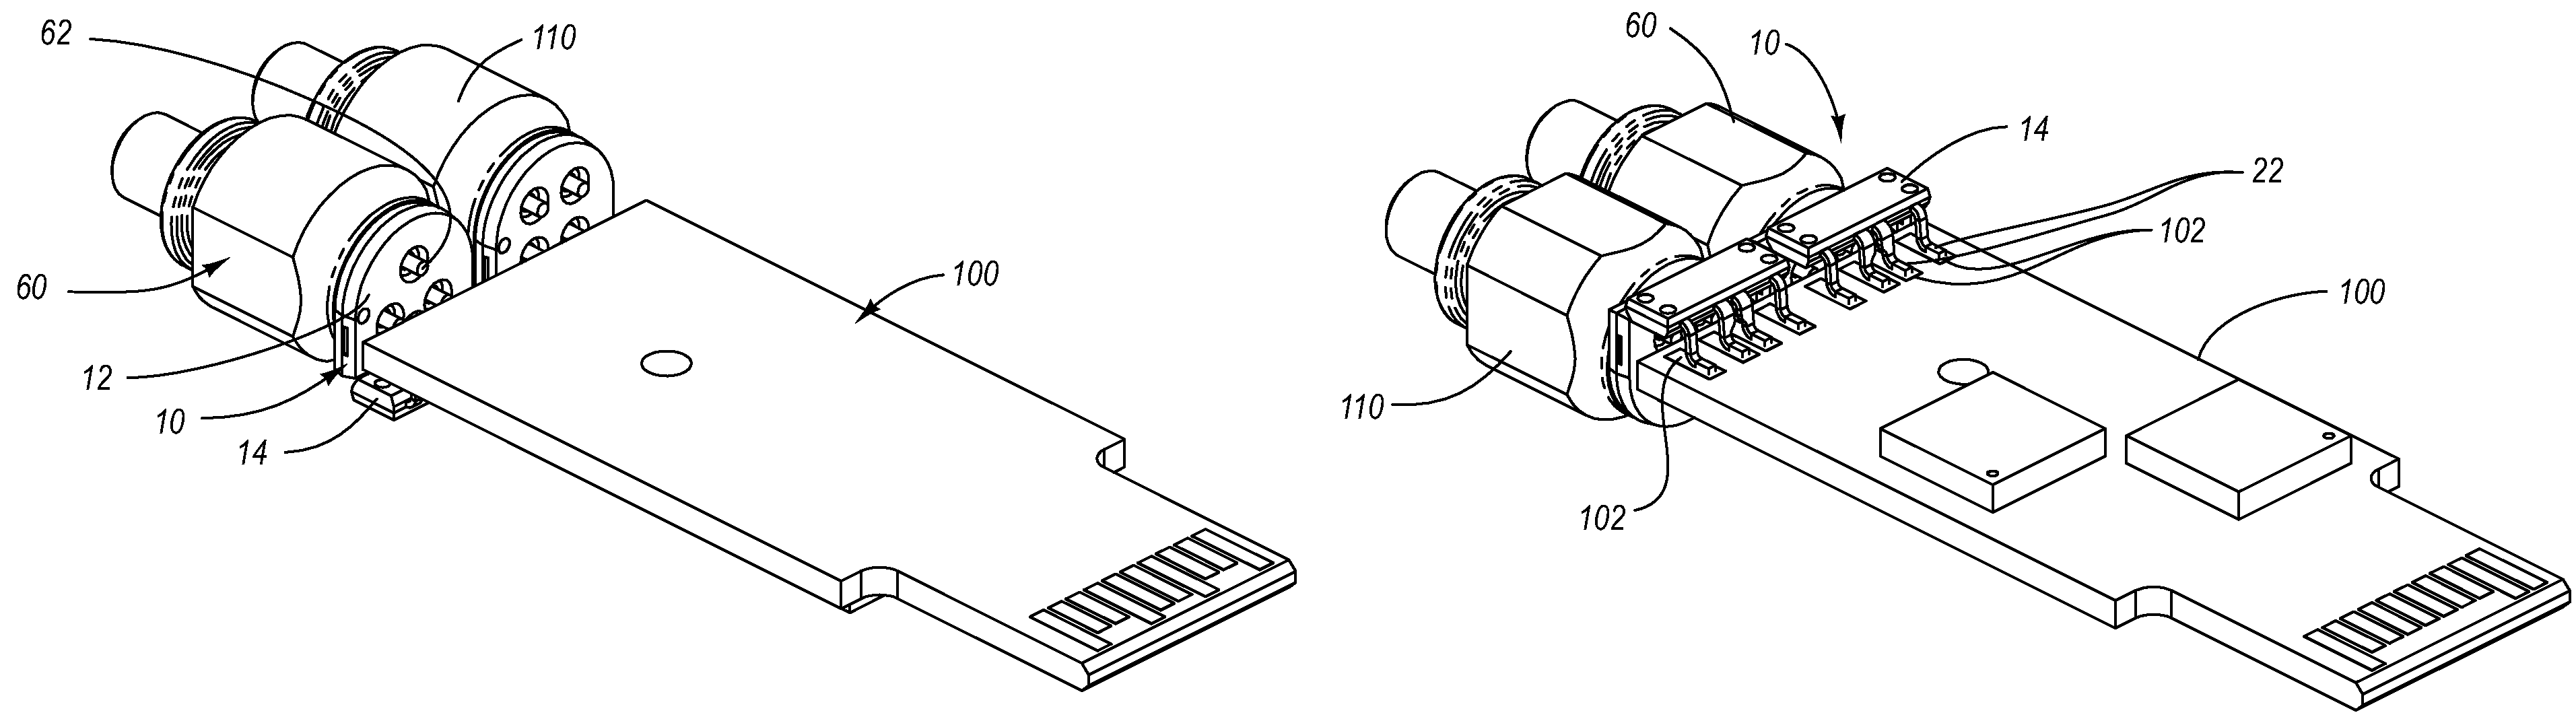 Molded lead frame connector with one or more passive components